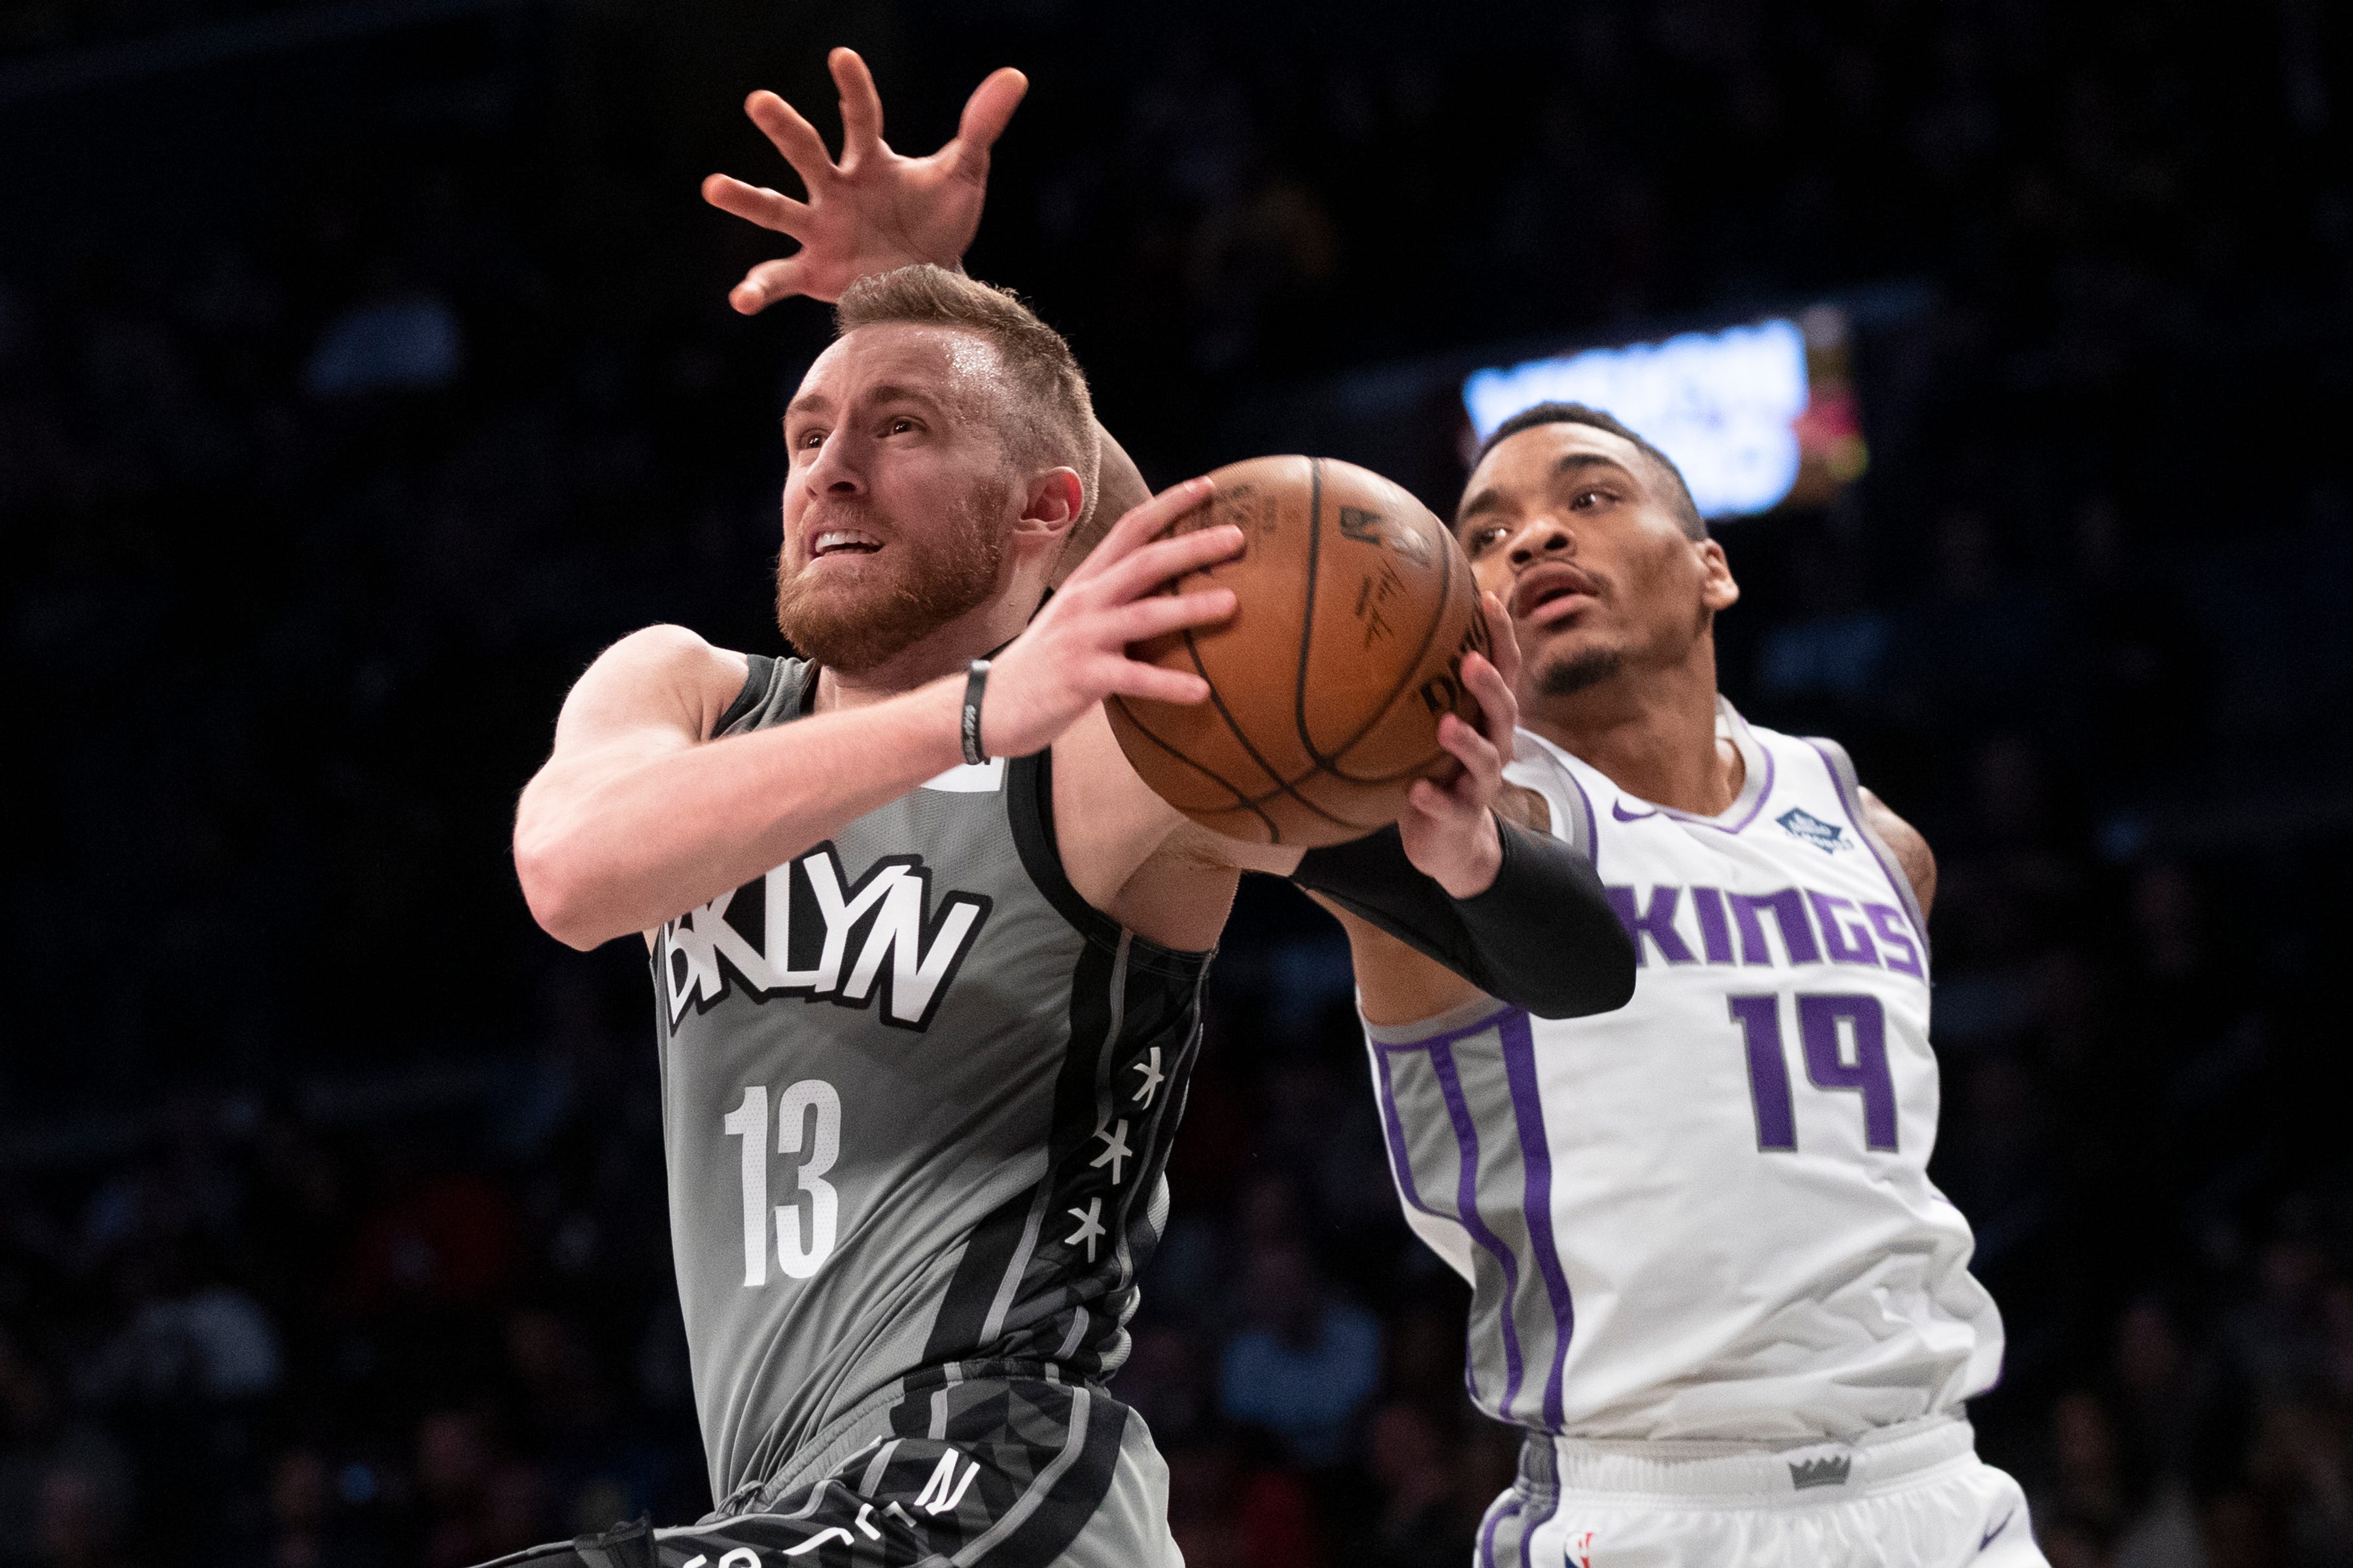 Brooklyn Nets guard Dzanan Musa (13) goes to the basket past Sacramento Kings guard DaQuan Jeffries (19) during the second half of an NBA basketball game, Friday, Nov. 22, 2019, in New York. The Nets won 116-97.